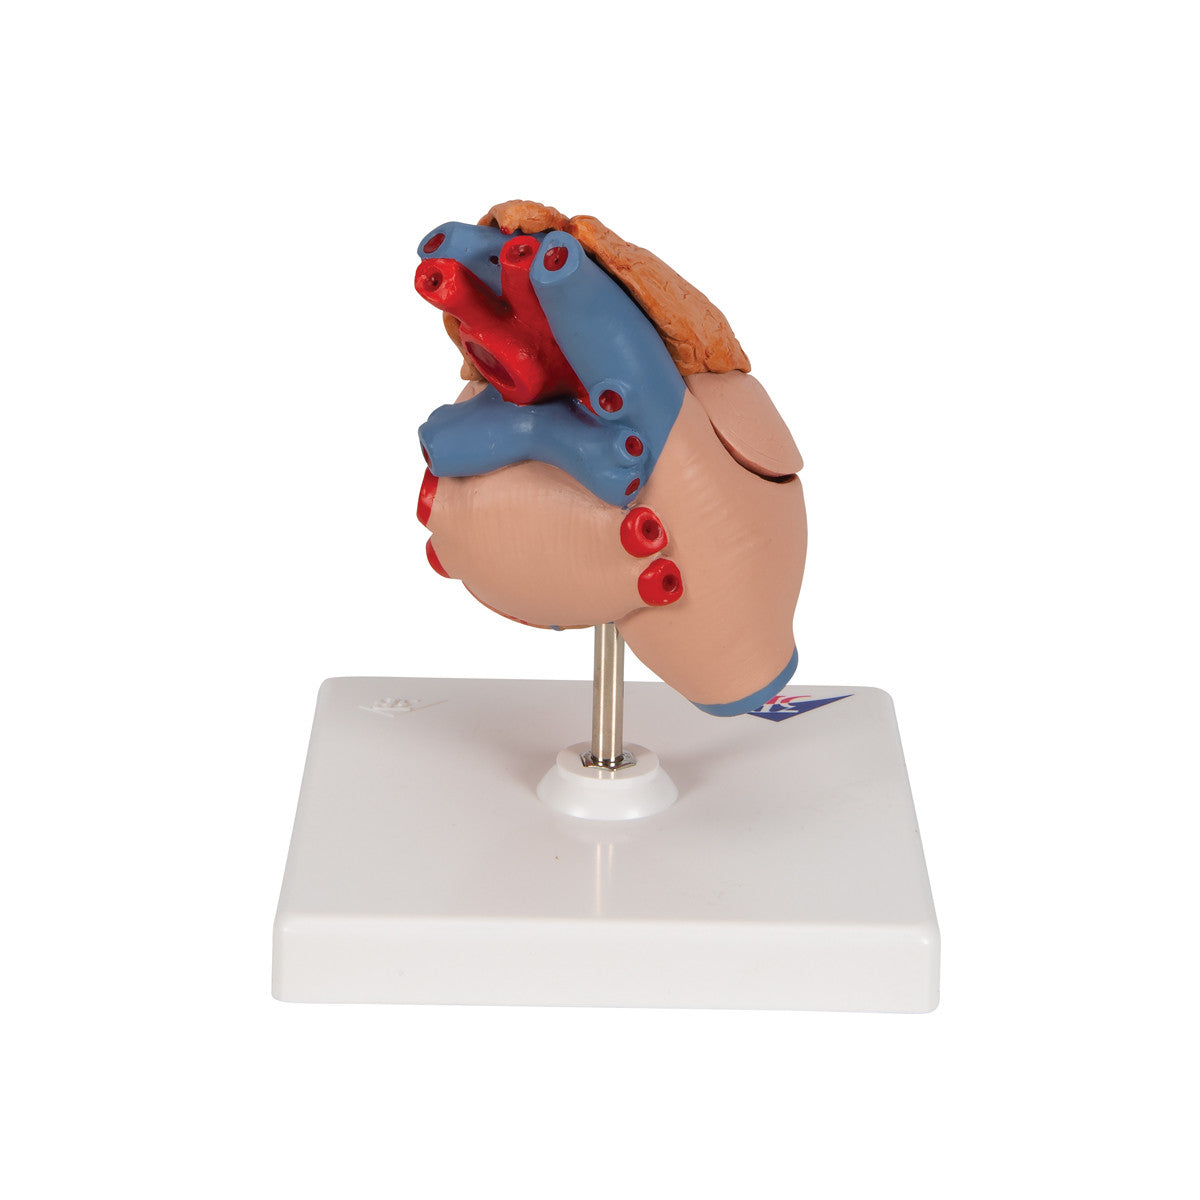 Heart Model with Thymus, 3 parts | 3B Scientific G08/1